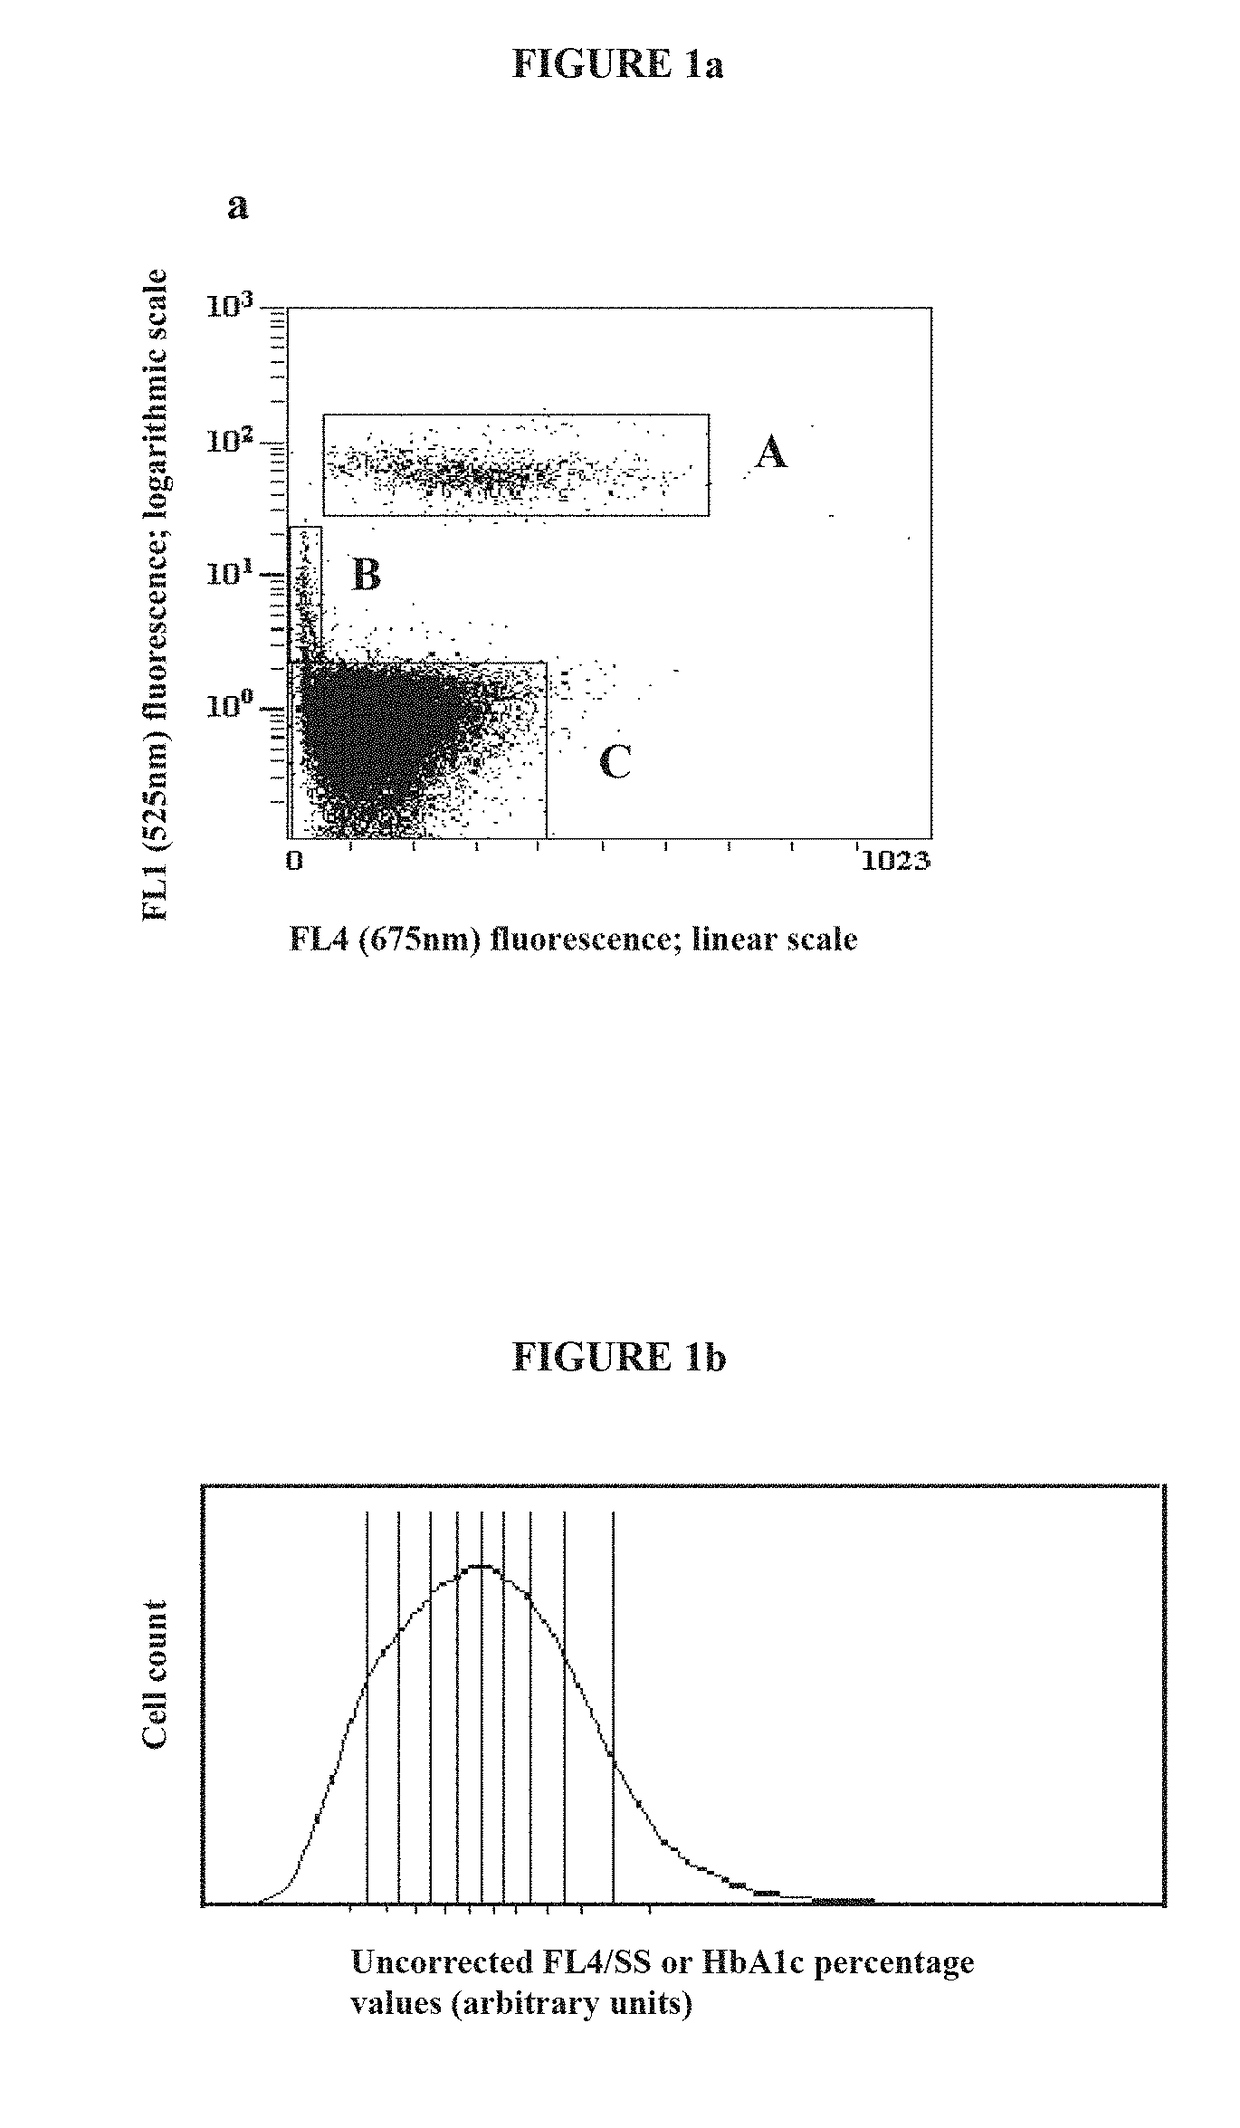 Systems and methods to determine the age of cells